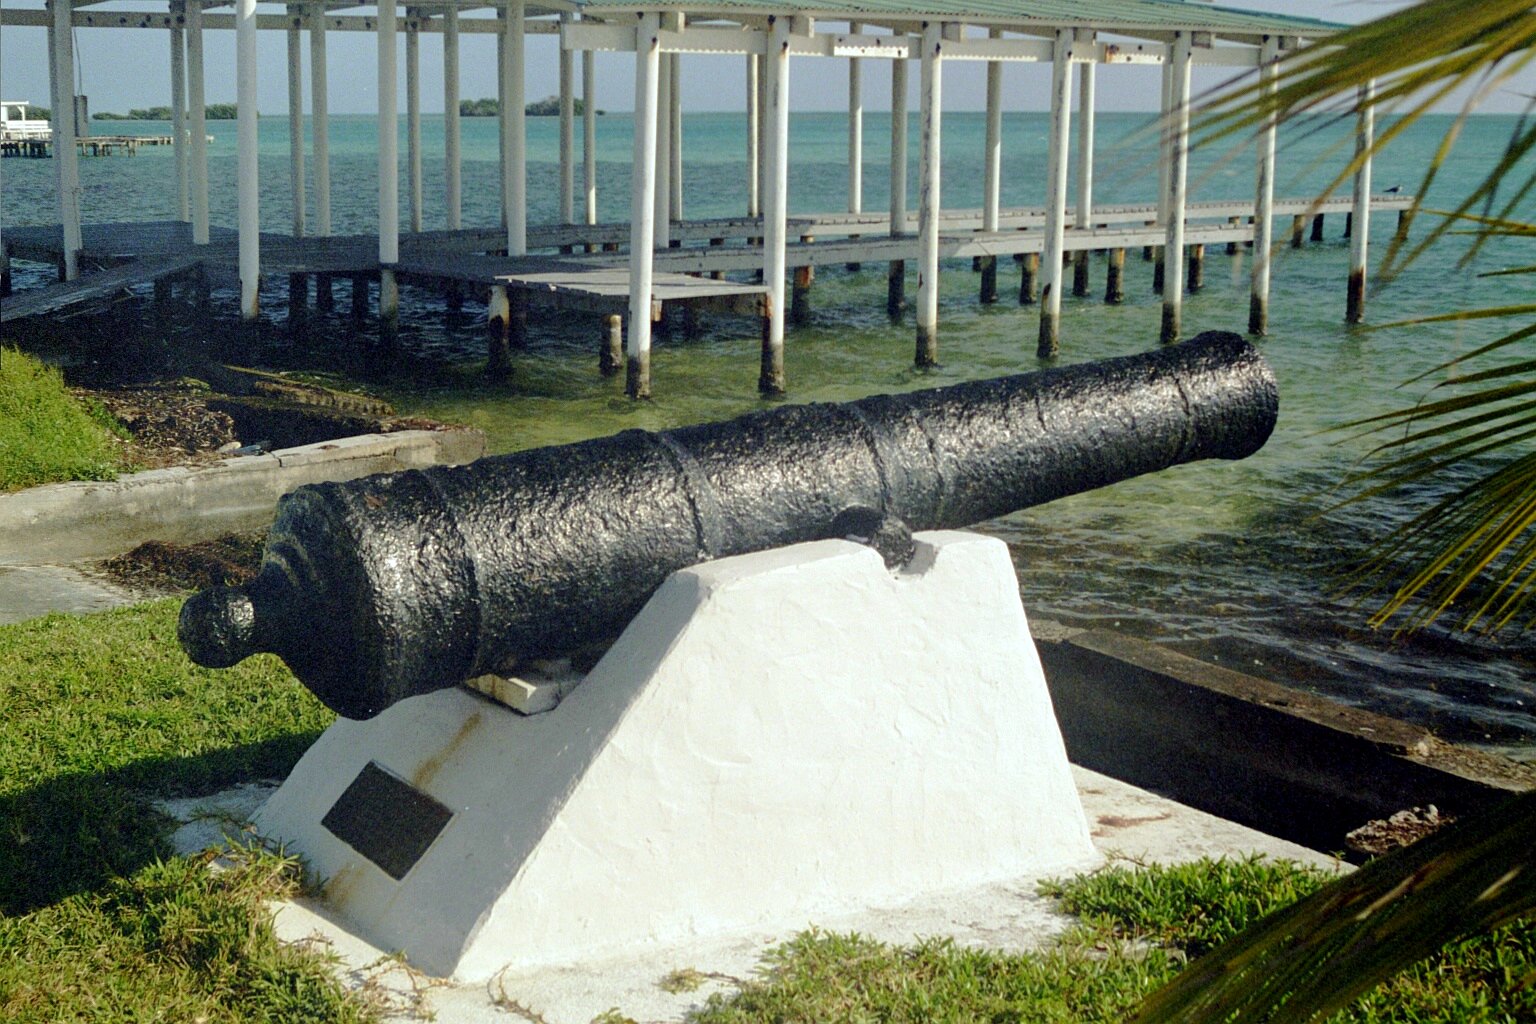 Ancient cannon standing sentry